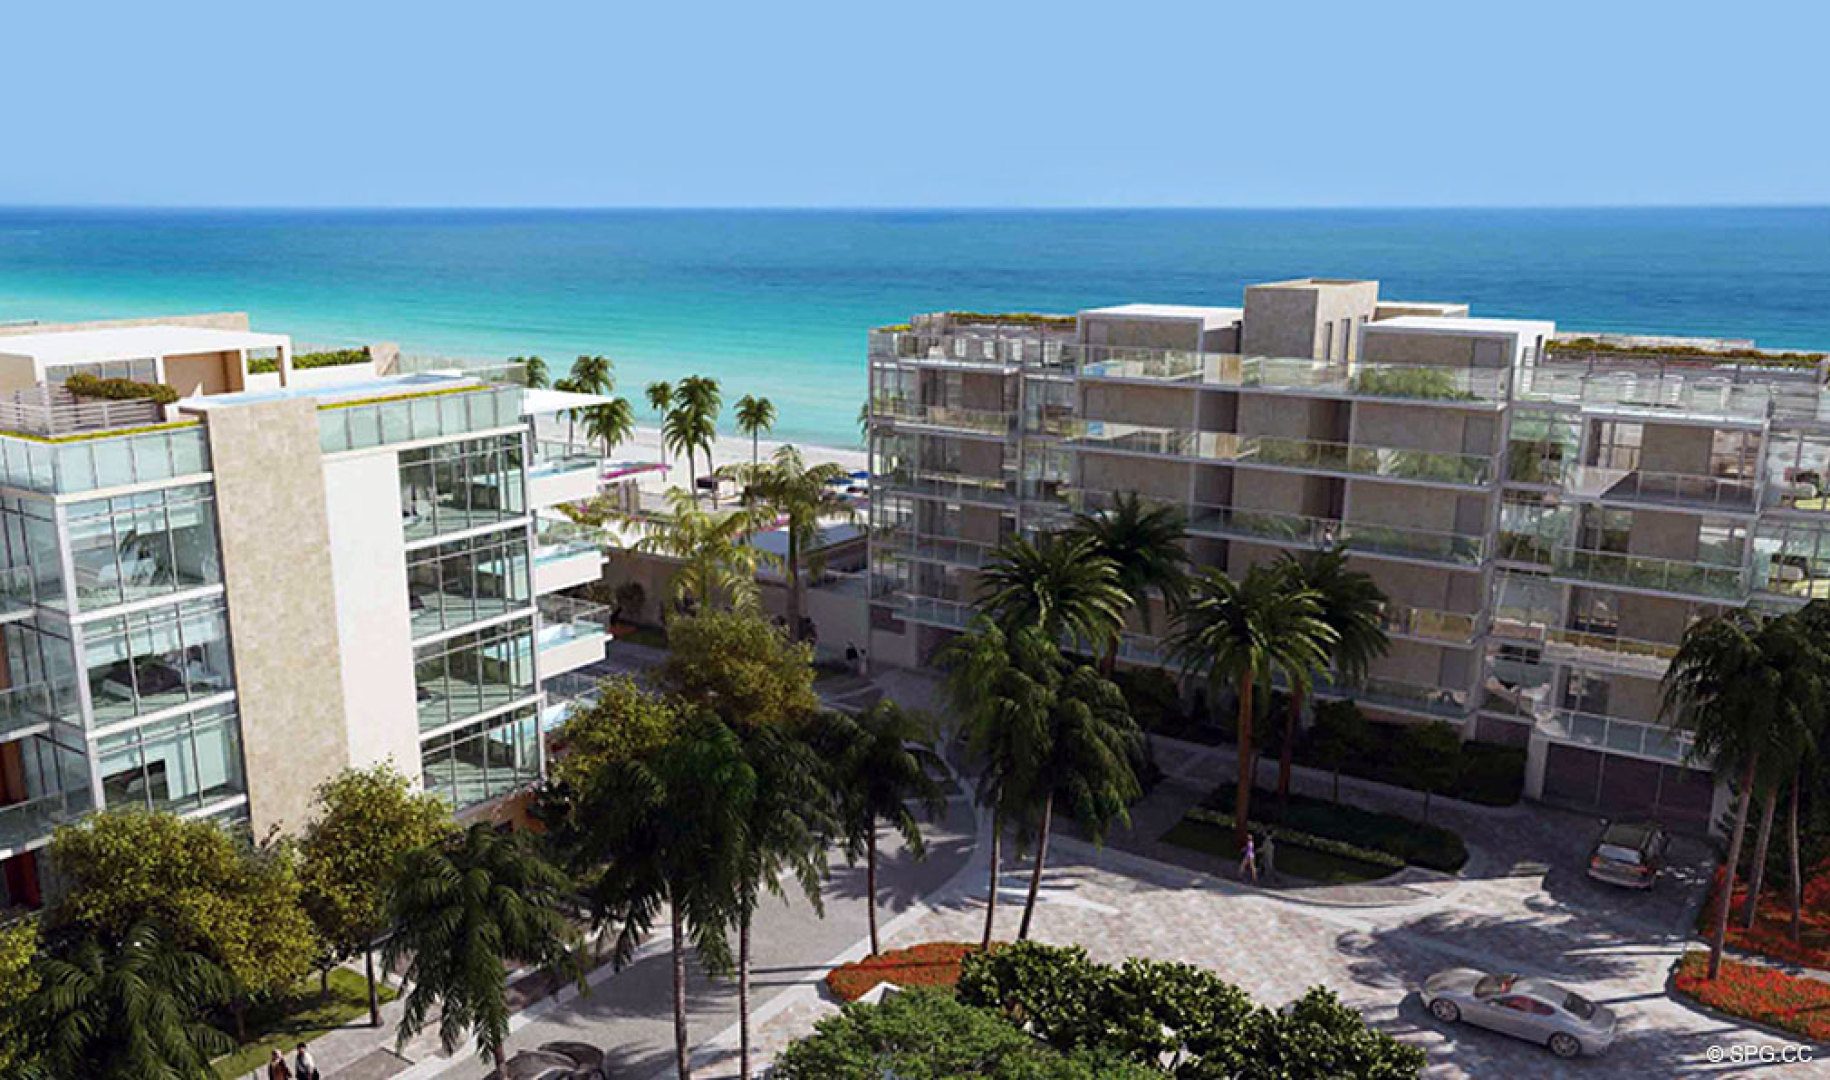 The Two Low-Rise Buildings of Sage Beach, Luxury Oceanfront Condos in Hollywood Beach Florida 33019